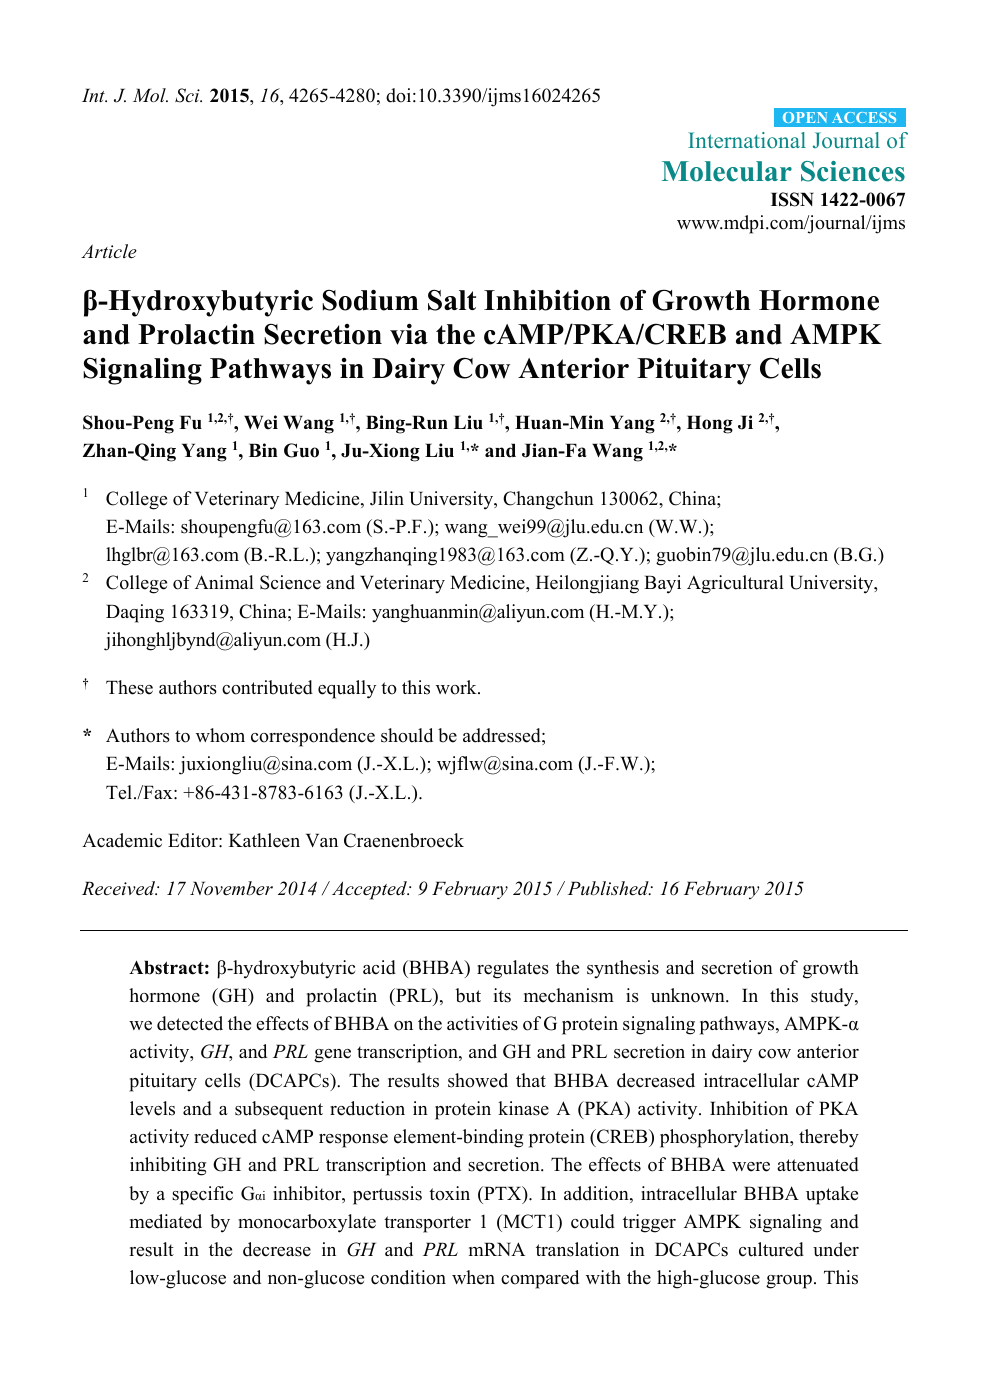 B Hydroxybutyric Sodium Salt Inhibition Of Growth Hormone And Prolactin Secretion Via The Camp Pka Creb And Ampk Signaling Pathways In Dairy Cow Anterior Pituitary Cells Topic Of Research Paper In Biological Sciences Download